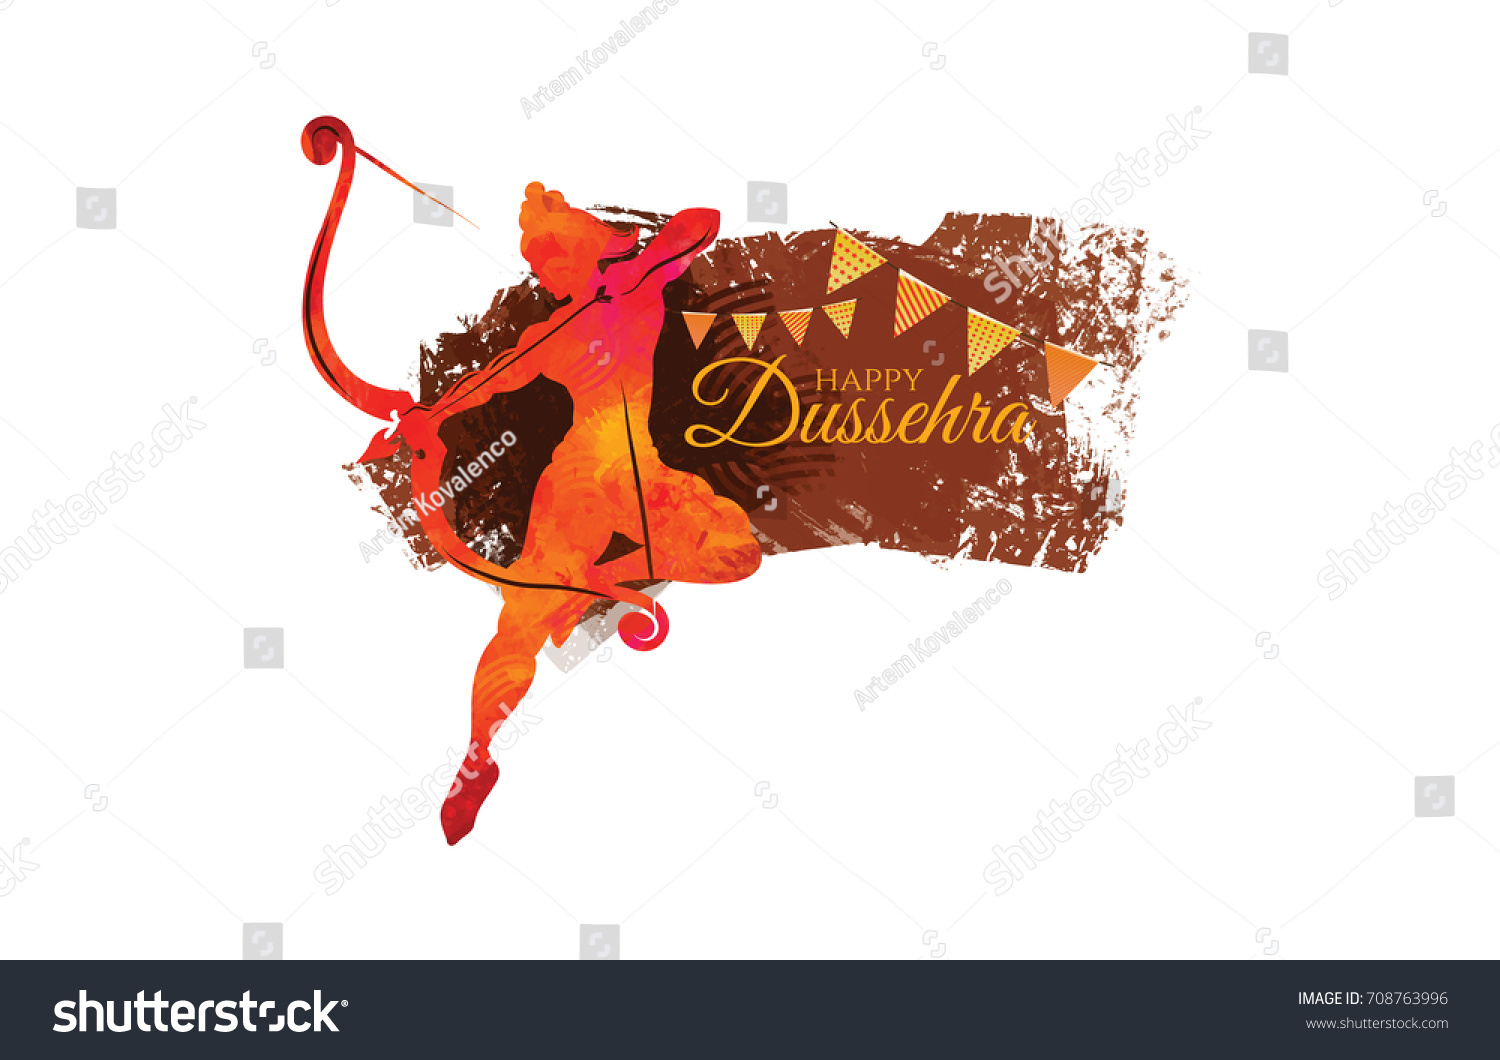 vector illustration indian holiday happy dussehra stock vector royalty free 708763996 https www shutterstock com image vector vector illustration indian holiday happy dussehra 708763996